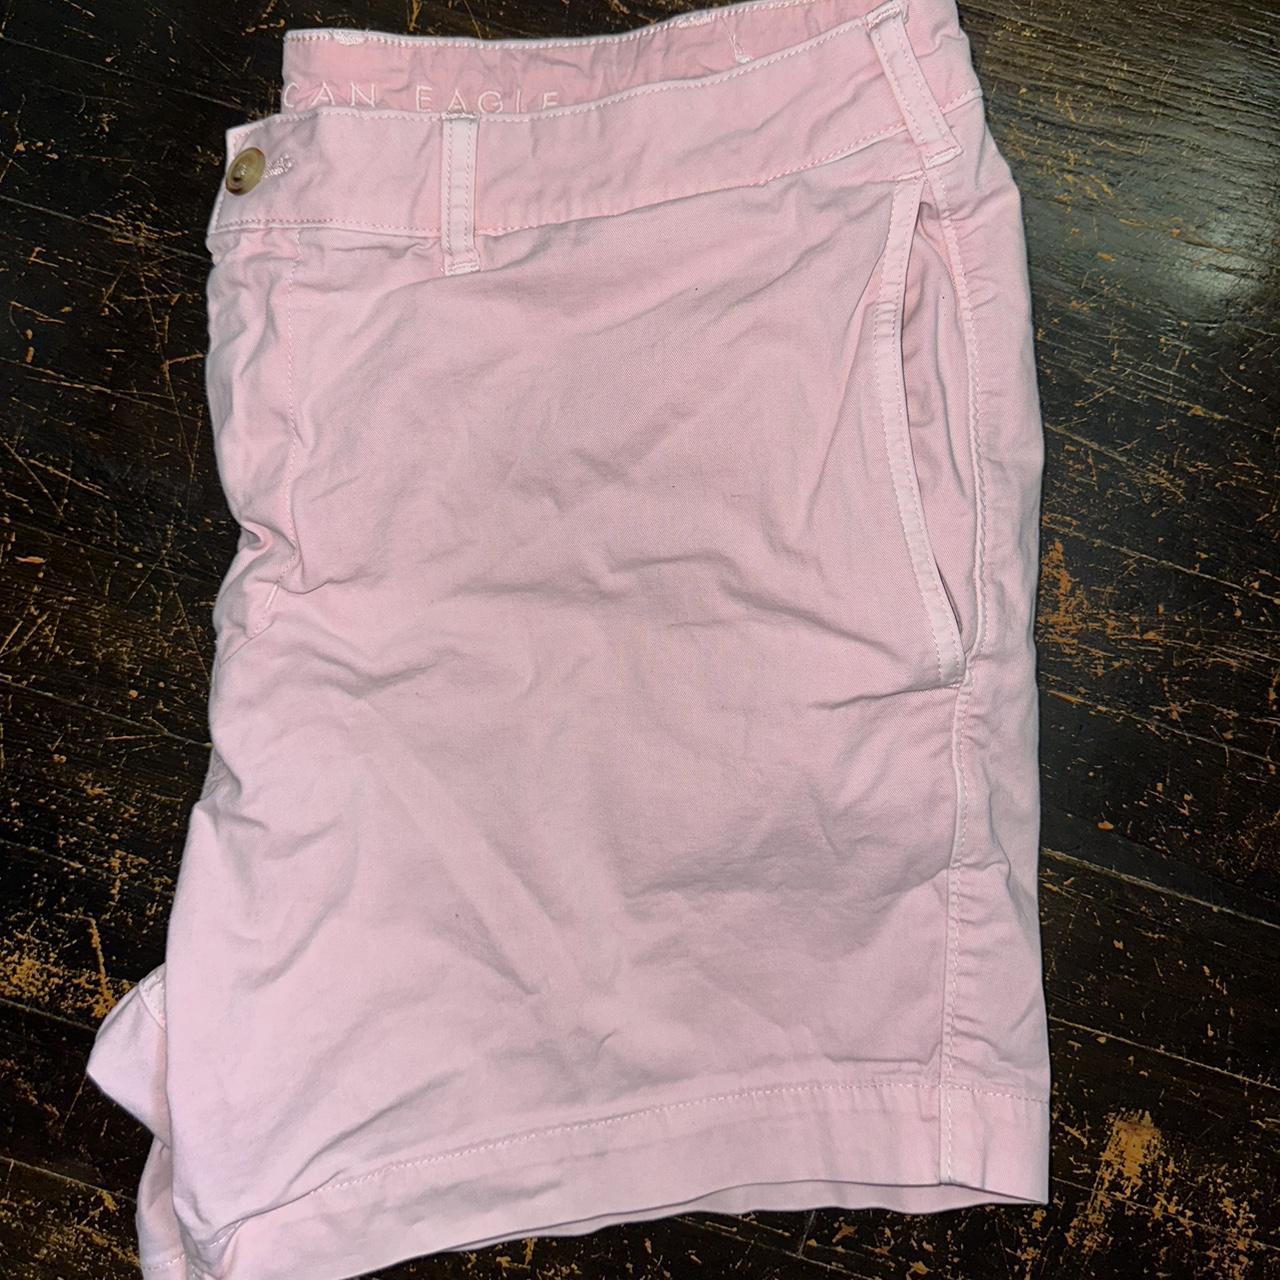 What To Wear With Pink Shorts? 38 Pink Shorts Outfits for